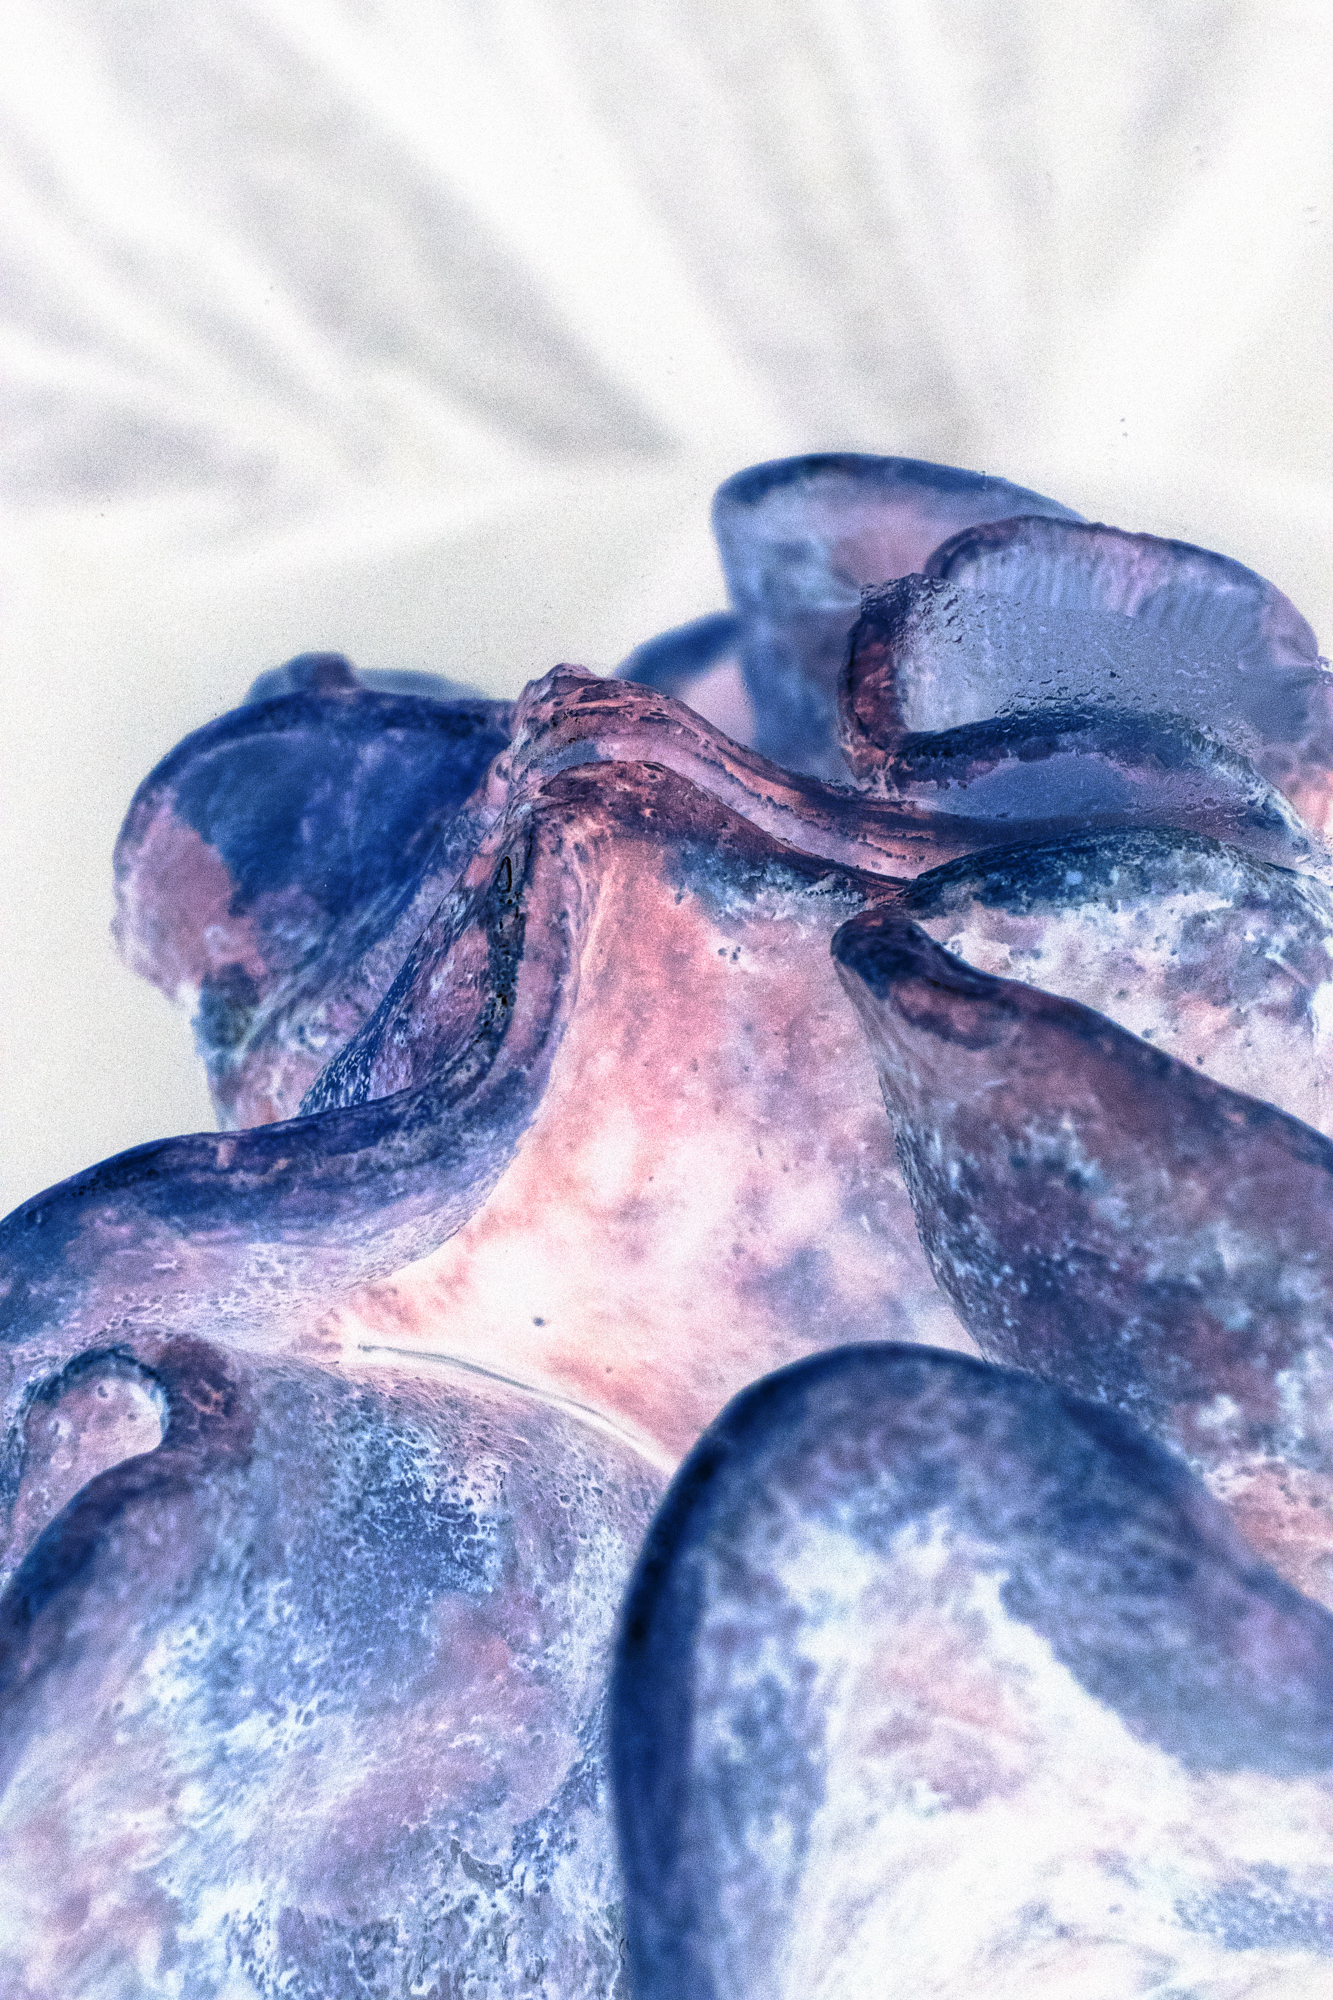 Ceramic sculpture depicting Mollusk close up, glazed with dark blue and salmon pink